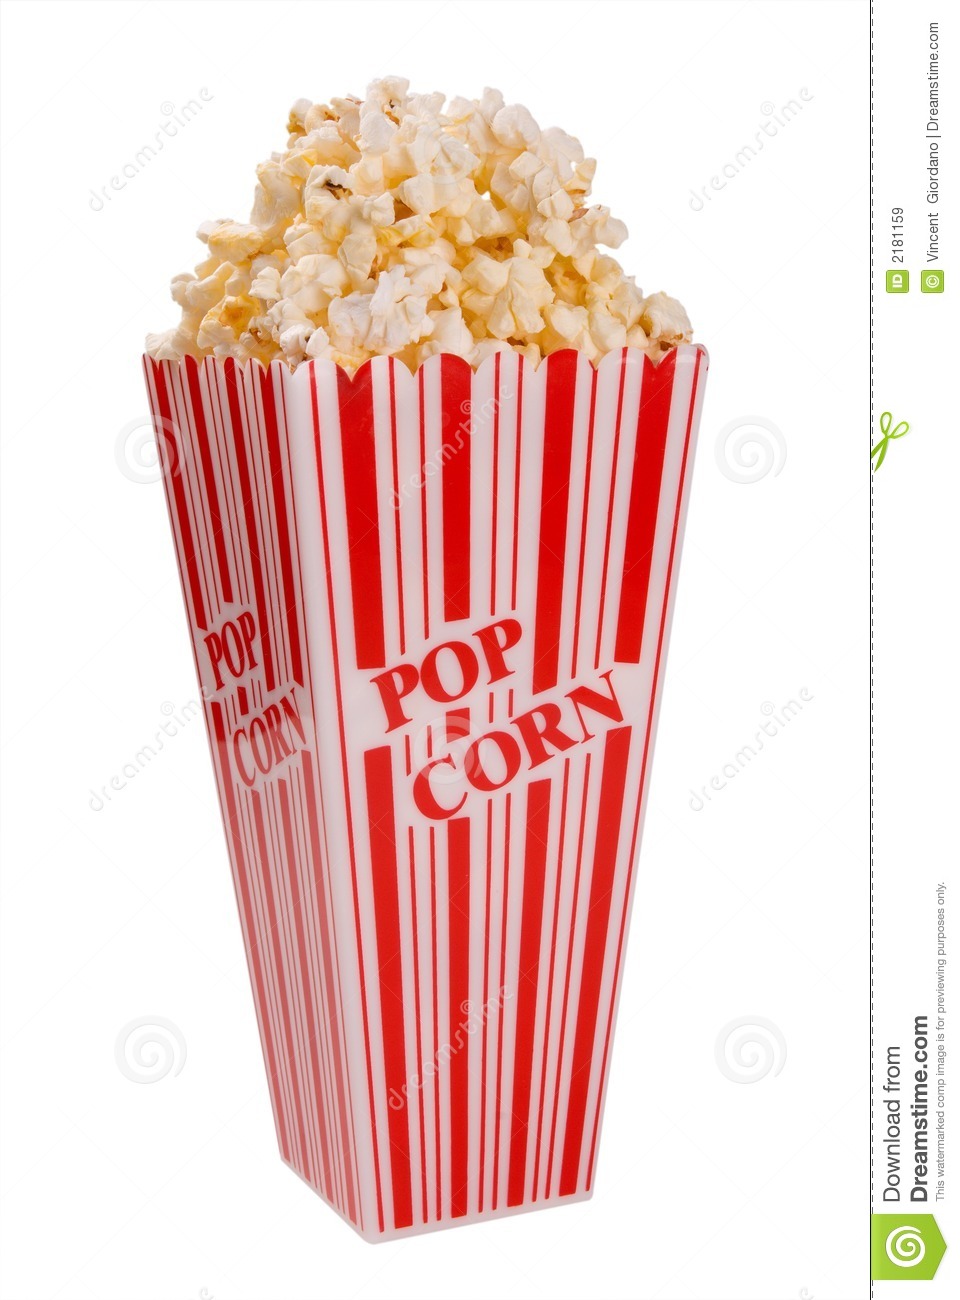 Popcorn In Container Royalty Free Stock Images   Image  2181159